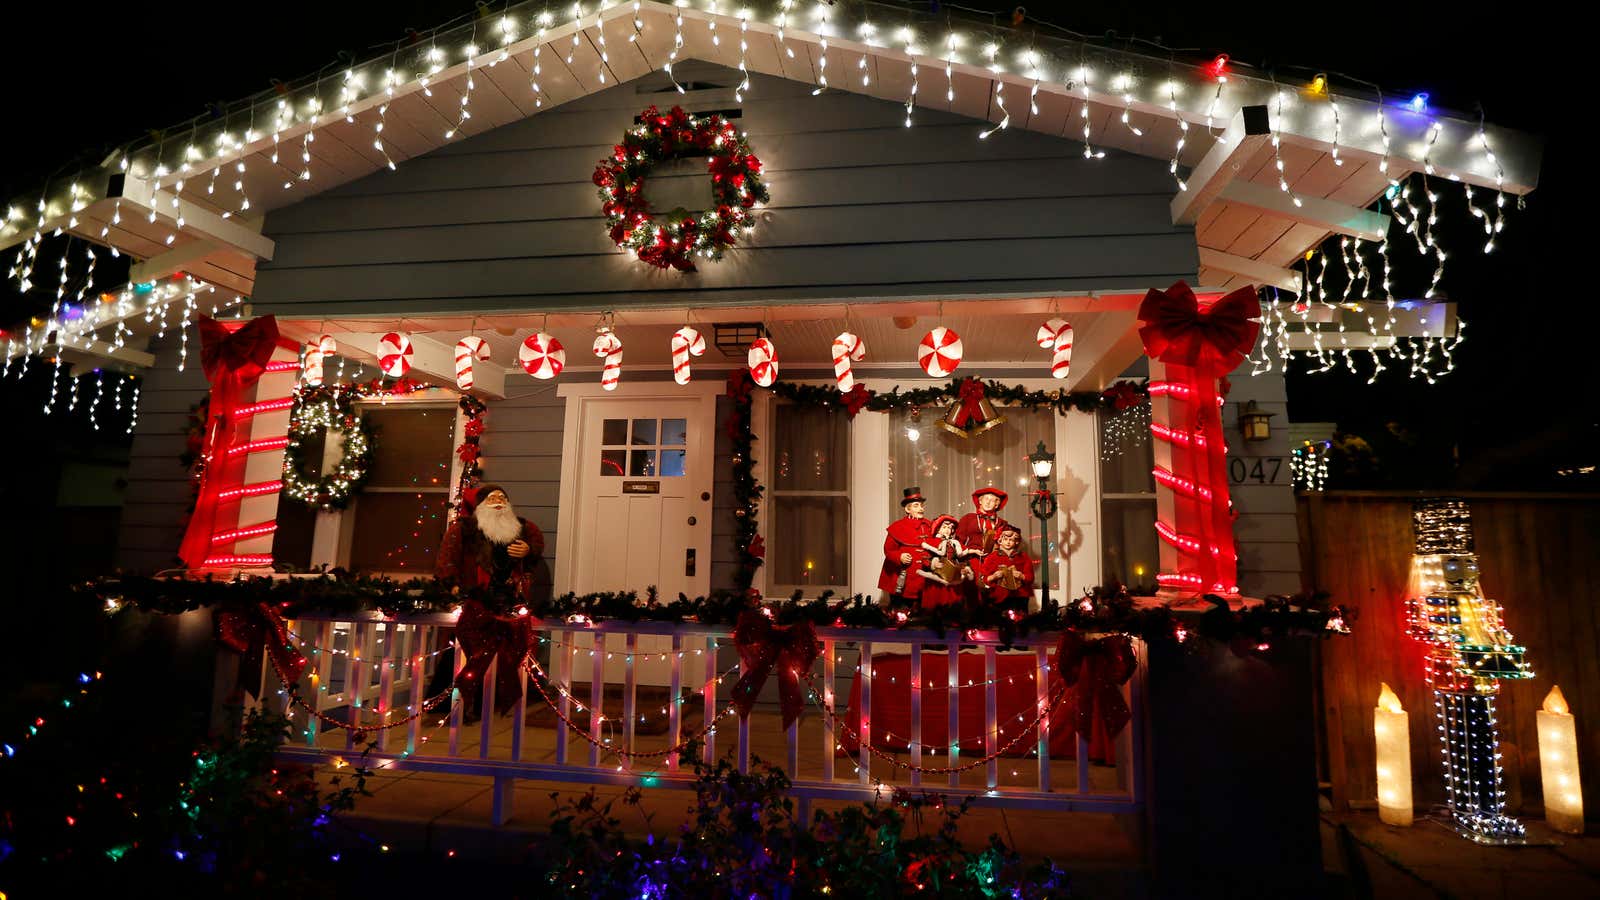 A house decorated with holiday lights, like many others.